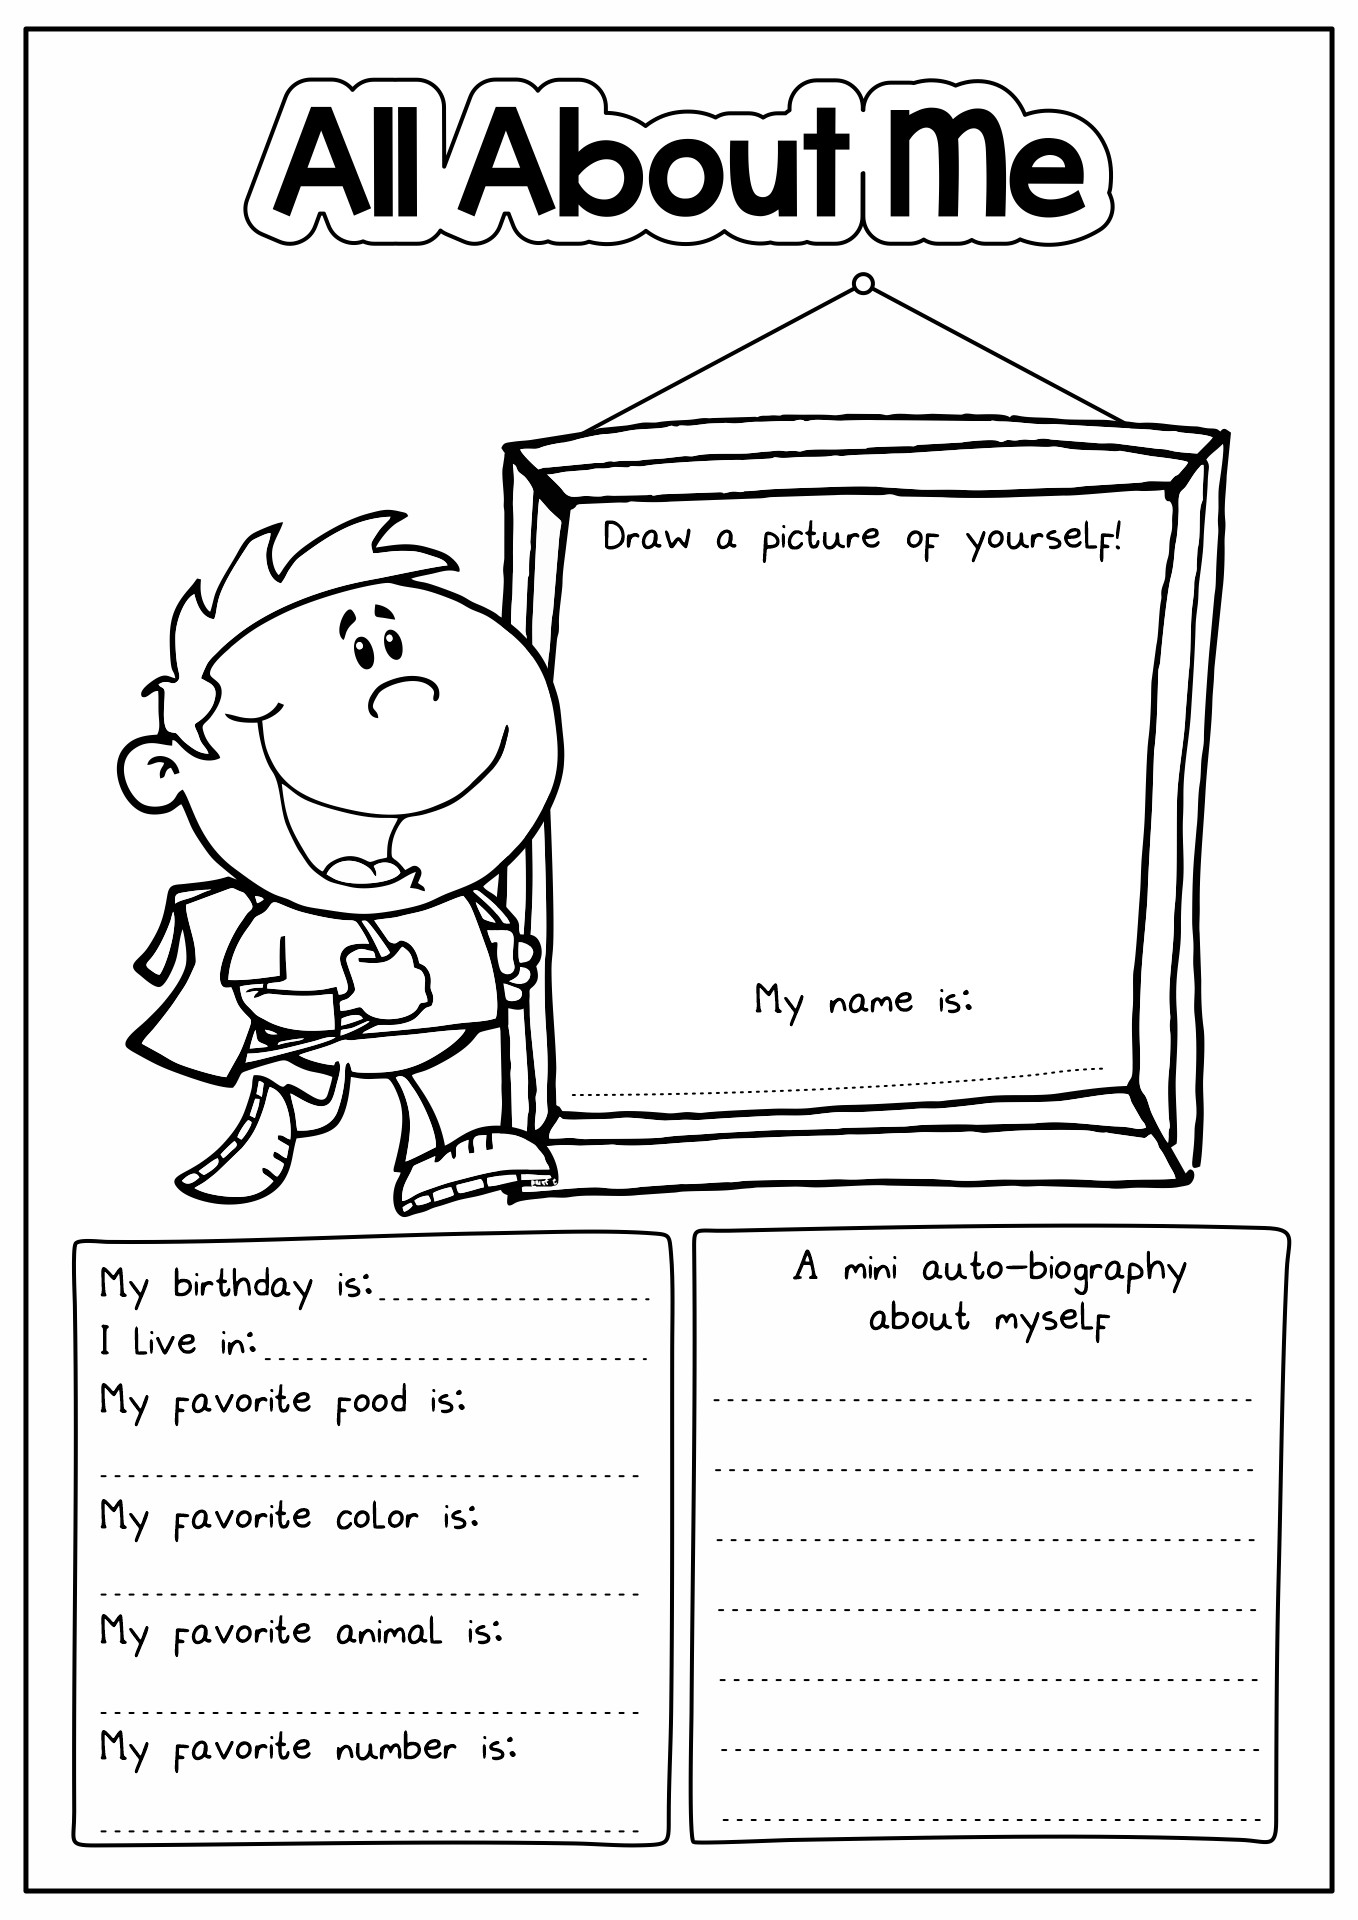 all-about-me-paragraph-template